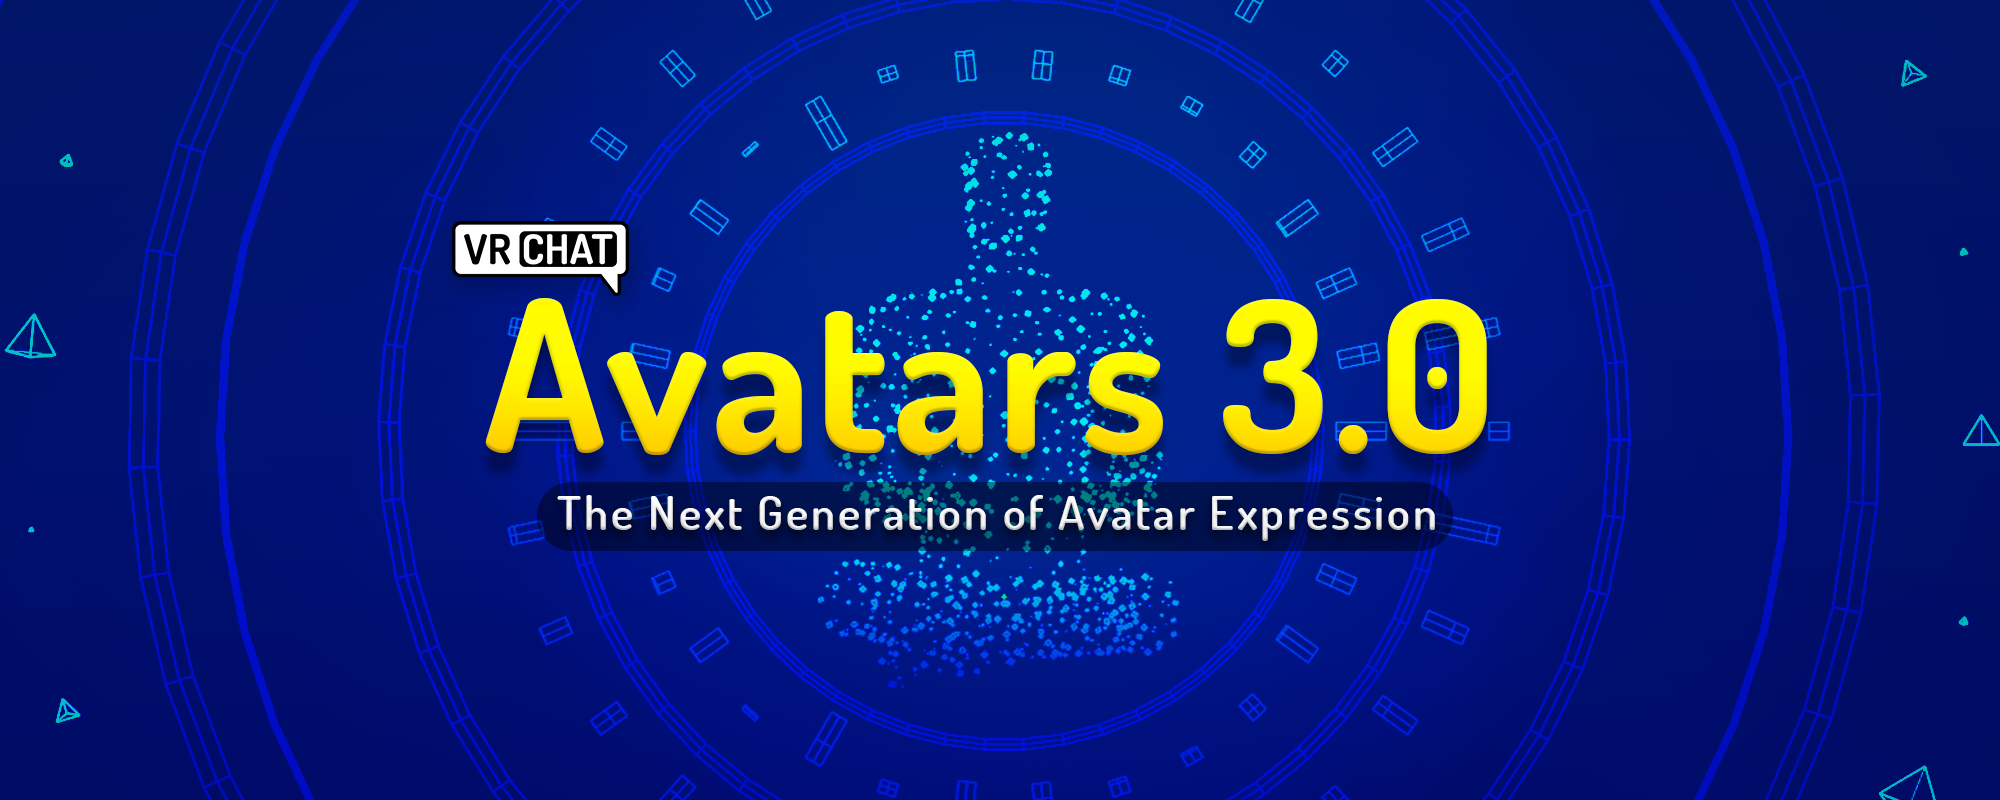 VRChat Launches Updated 3.0 Avatar System, Increasing Customization